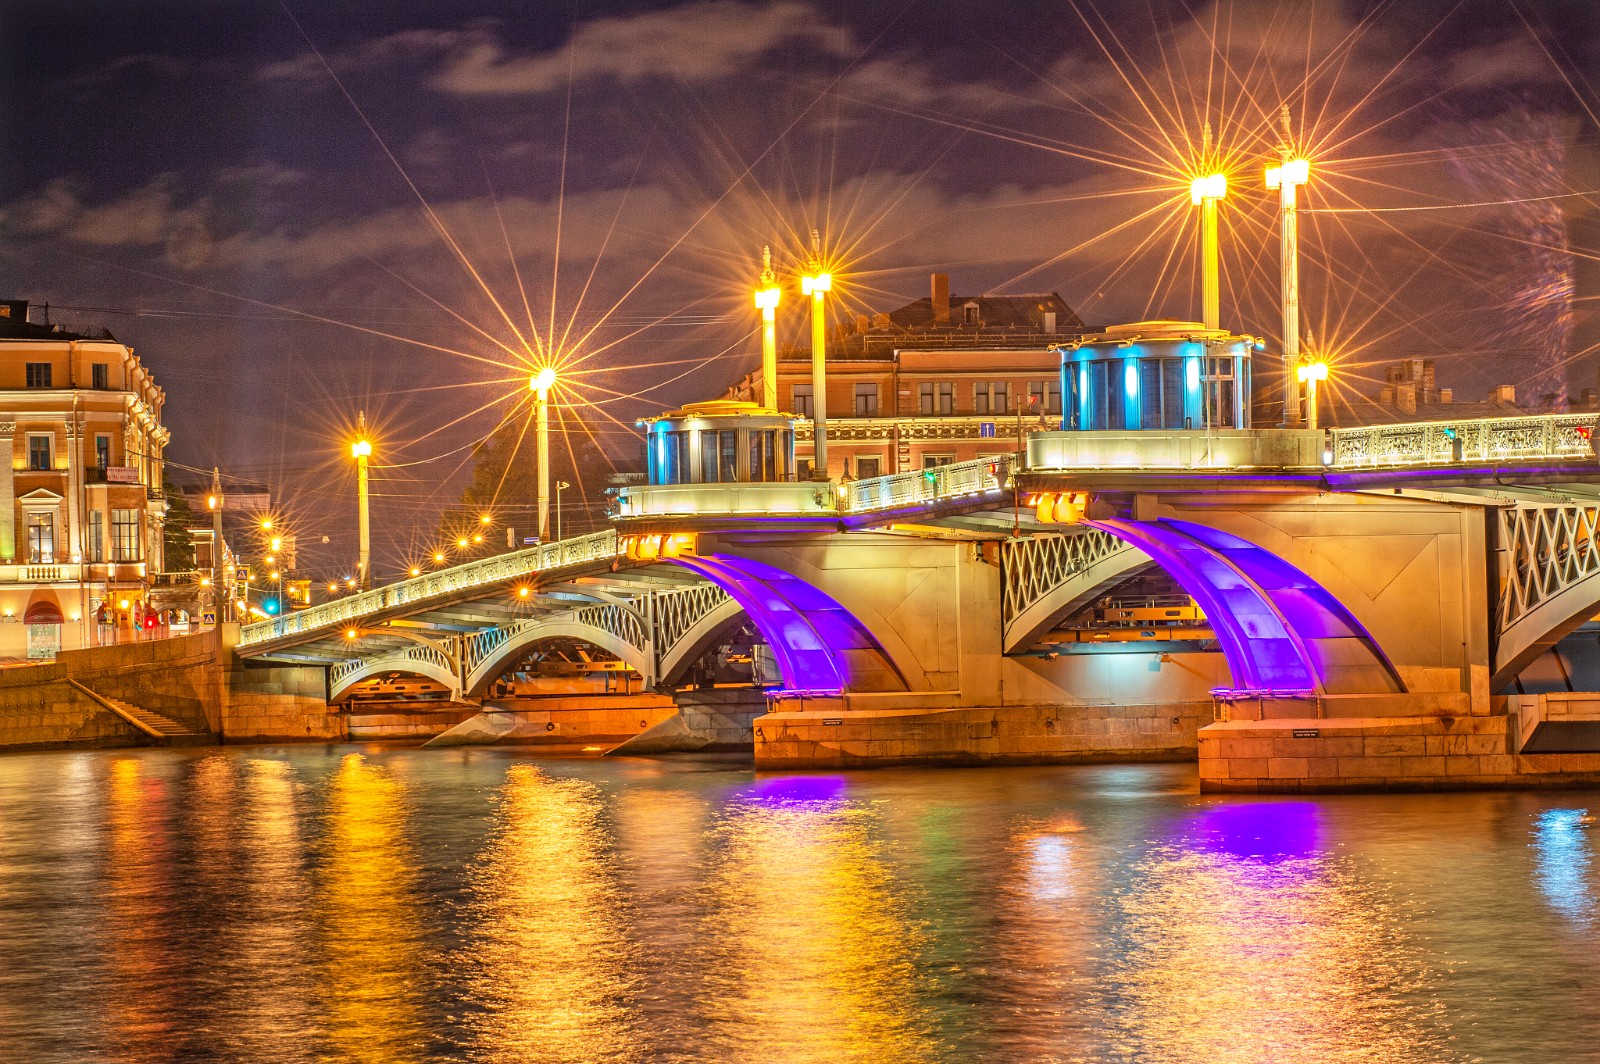 Stepping into St. Petersburg: A world of bridges